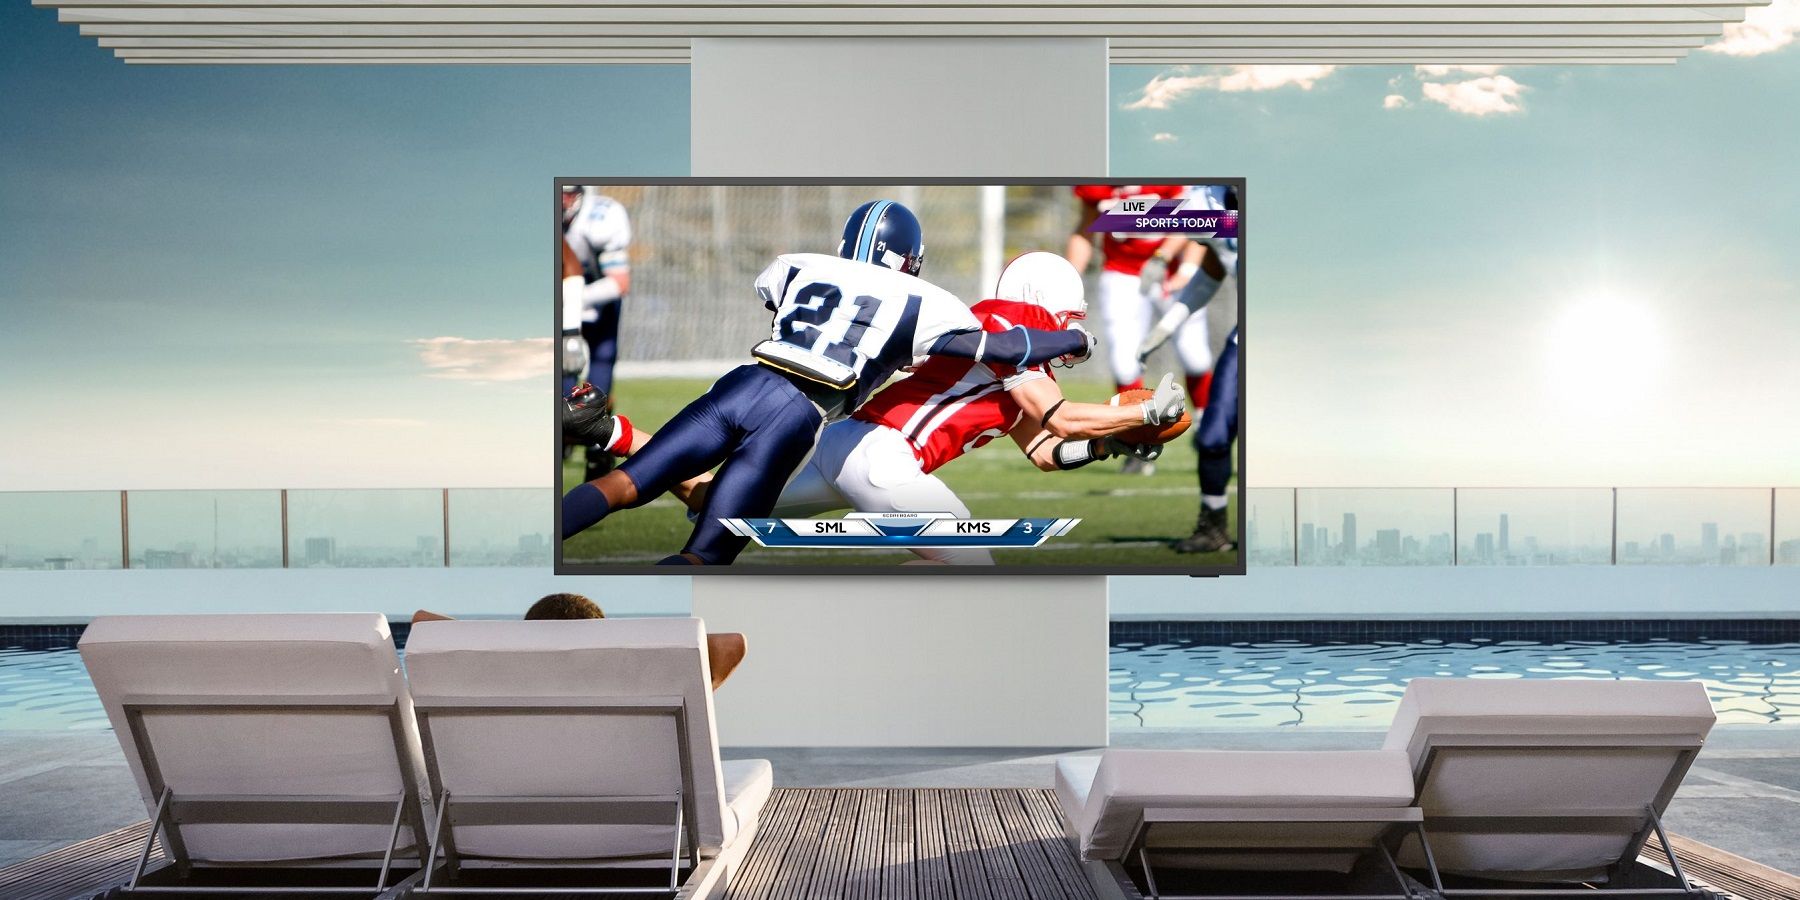 Samsungs New Outdoor 4K TV Is Bright Enough to Watch In Direct Sun & Rain Resistant